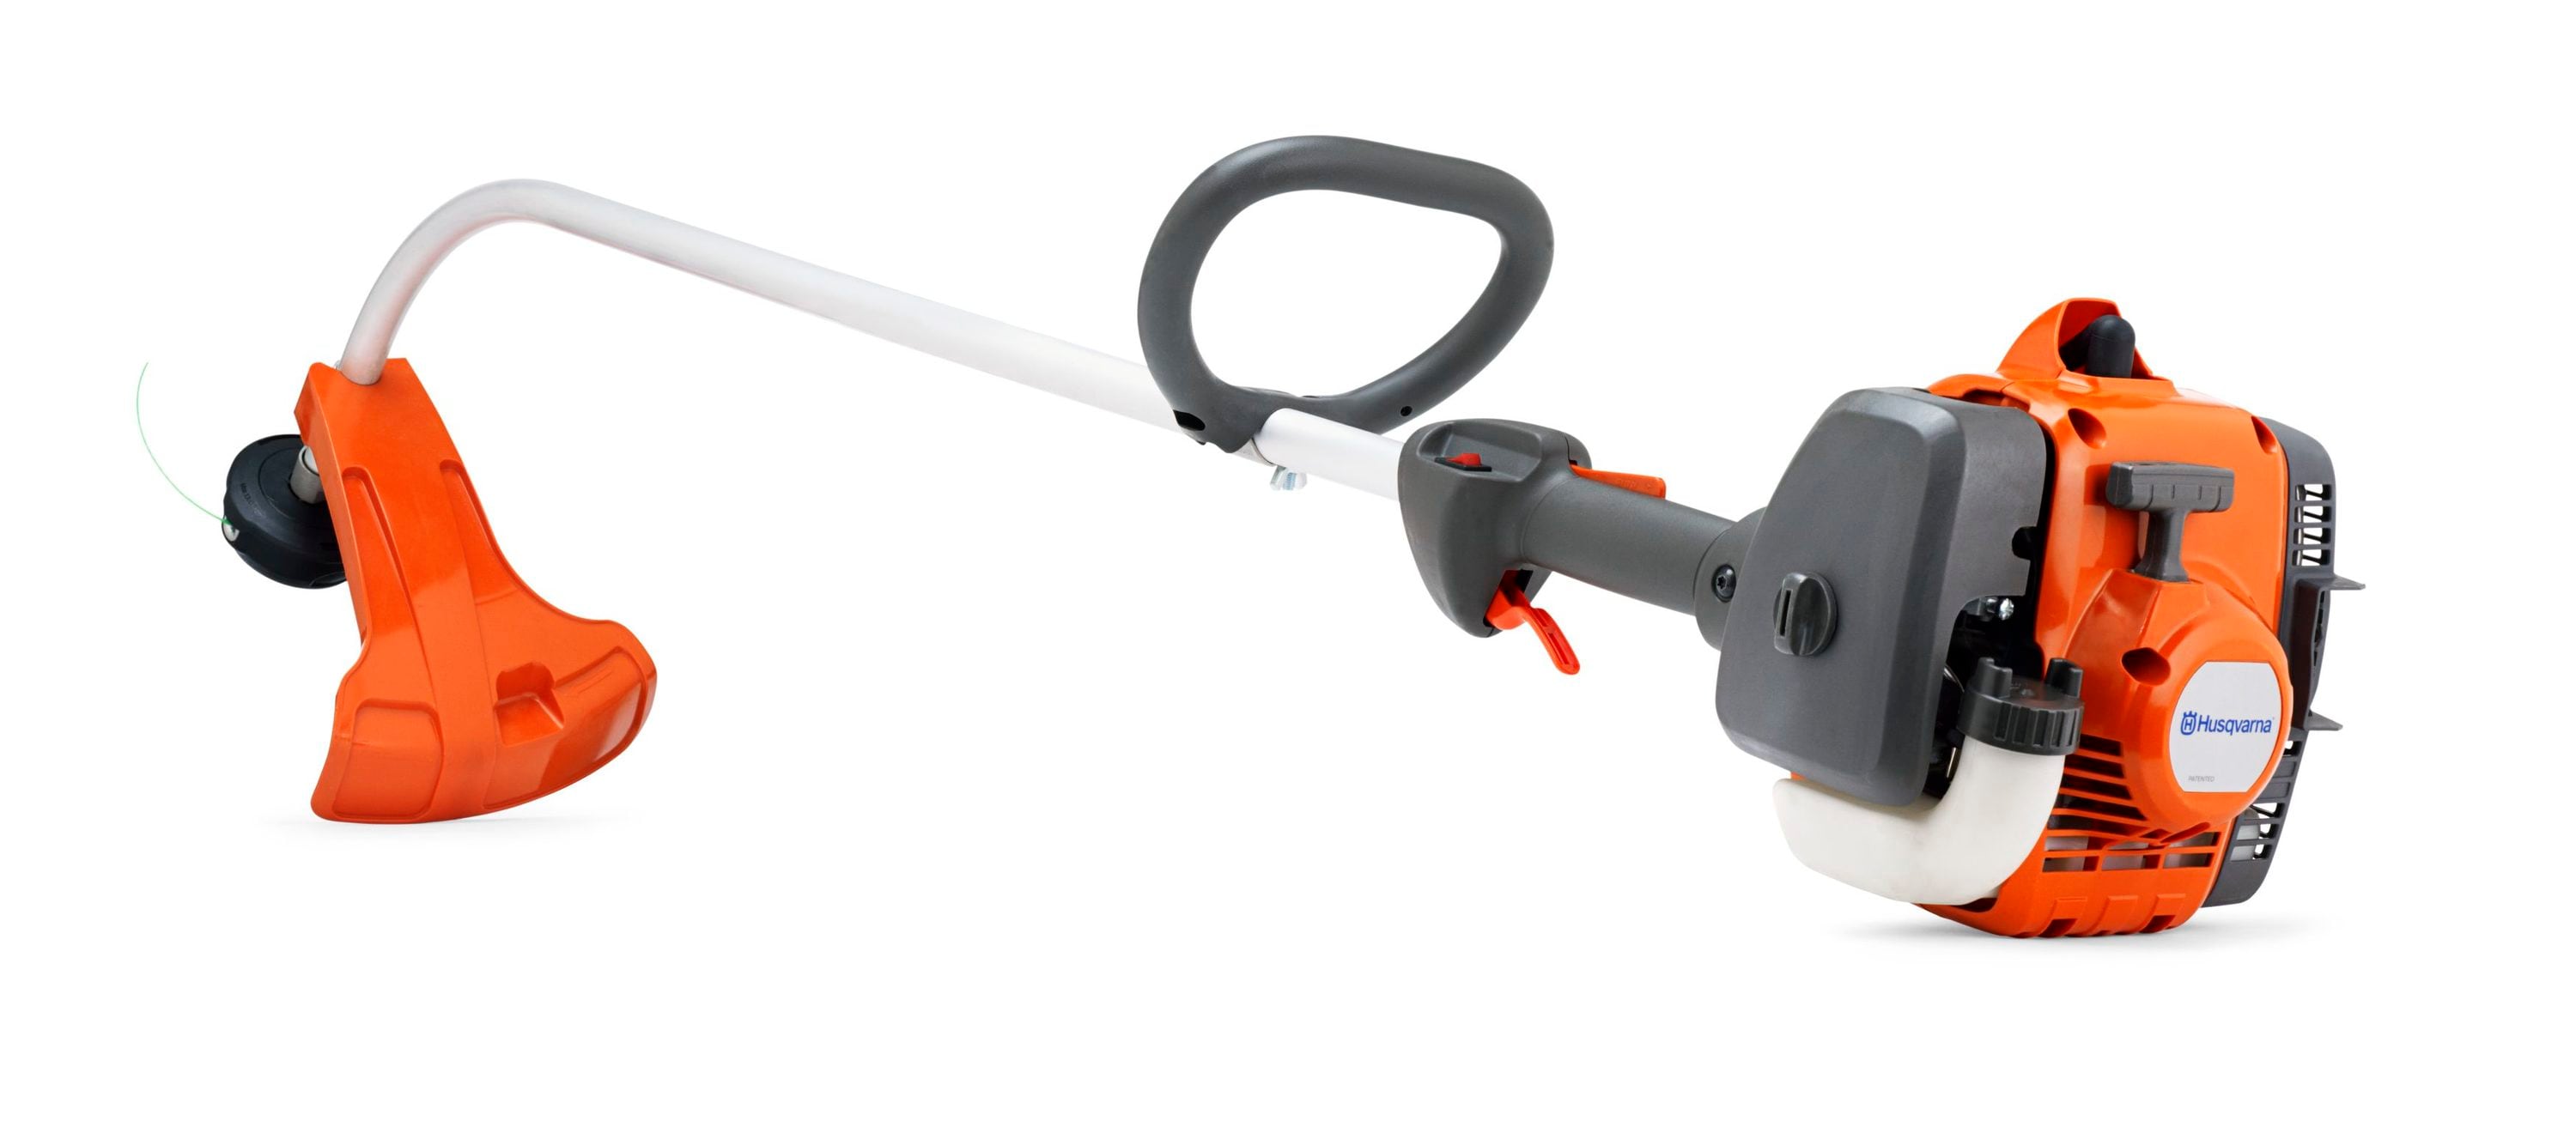 Husqvarna 22-cu 17-in Curved Shaft String Trimmer Edger Capable at Lowes.com